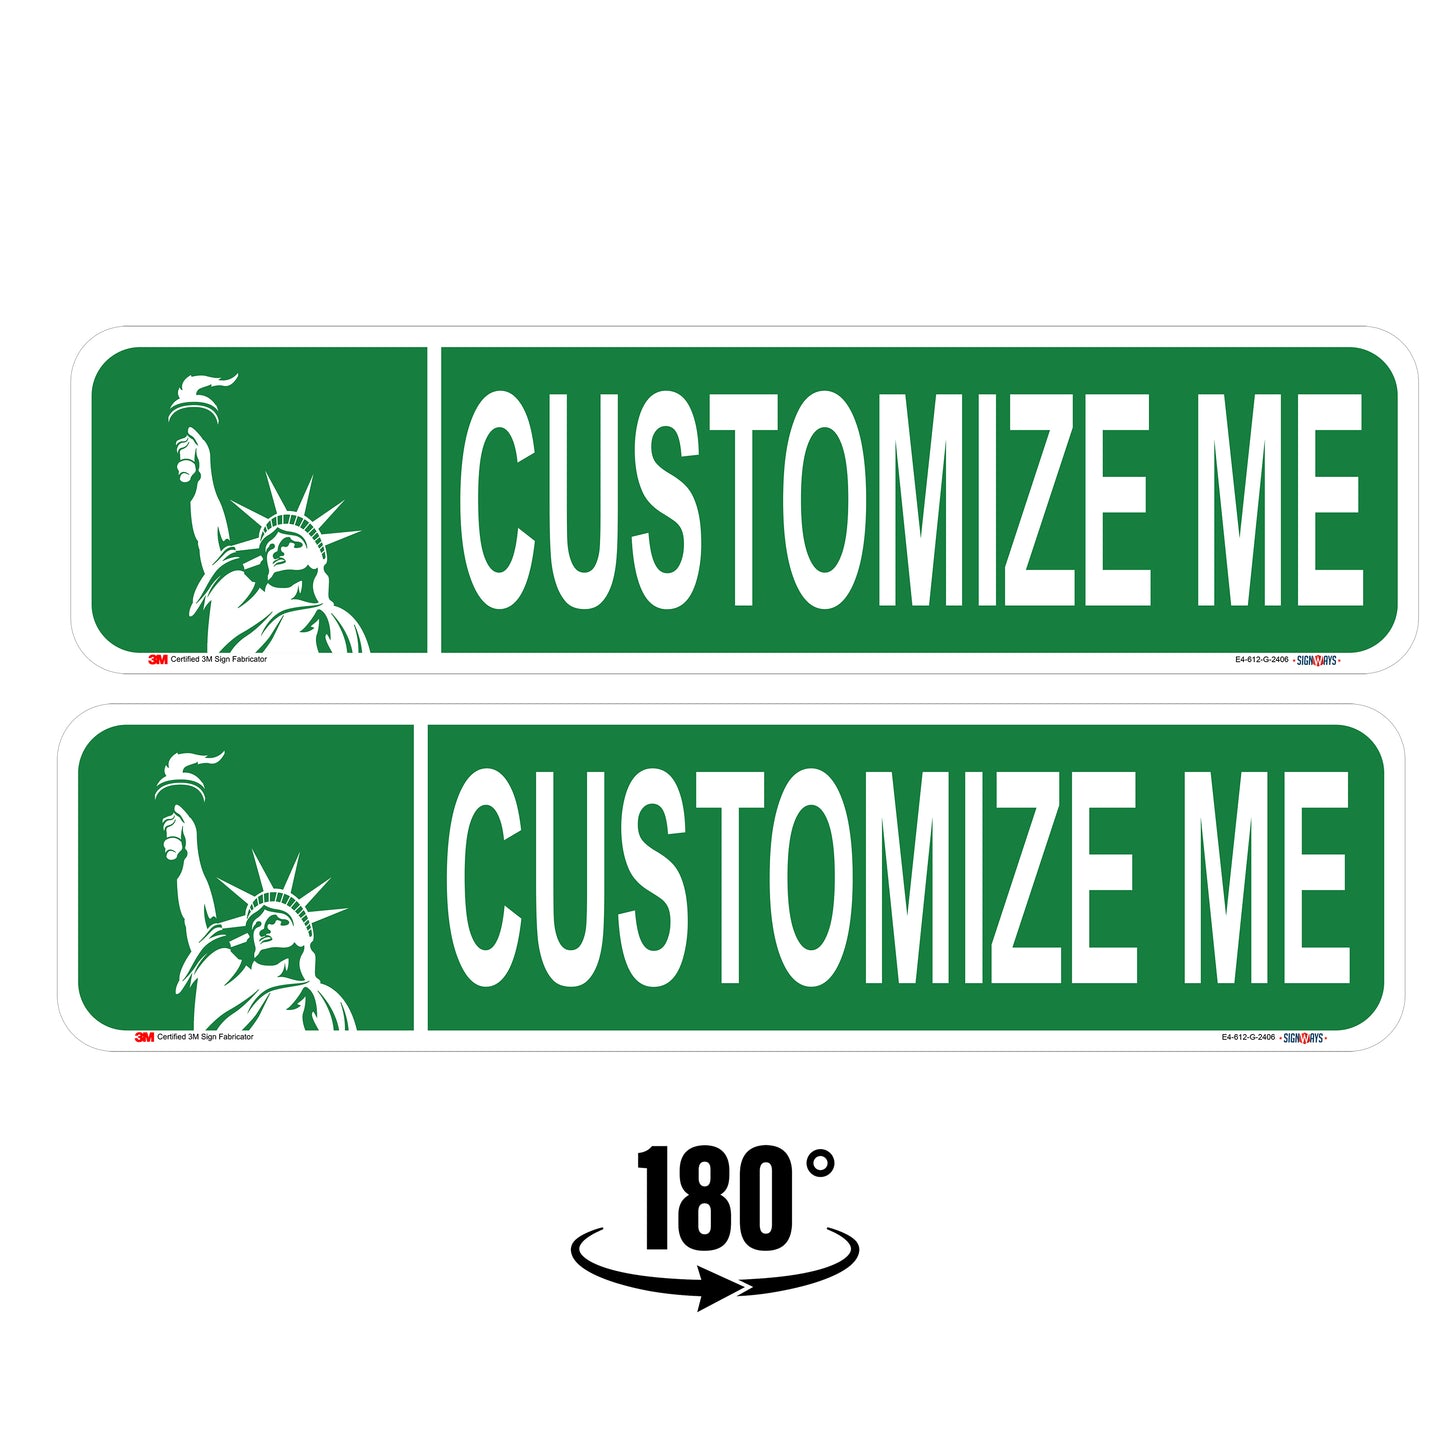 Customizable Statue of Liberty Double-Sided Street Sign